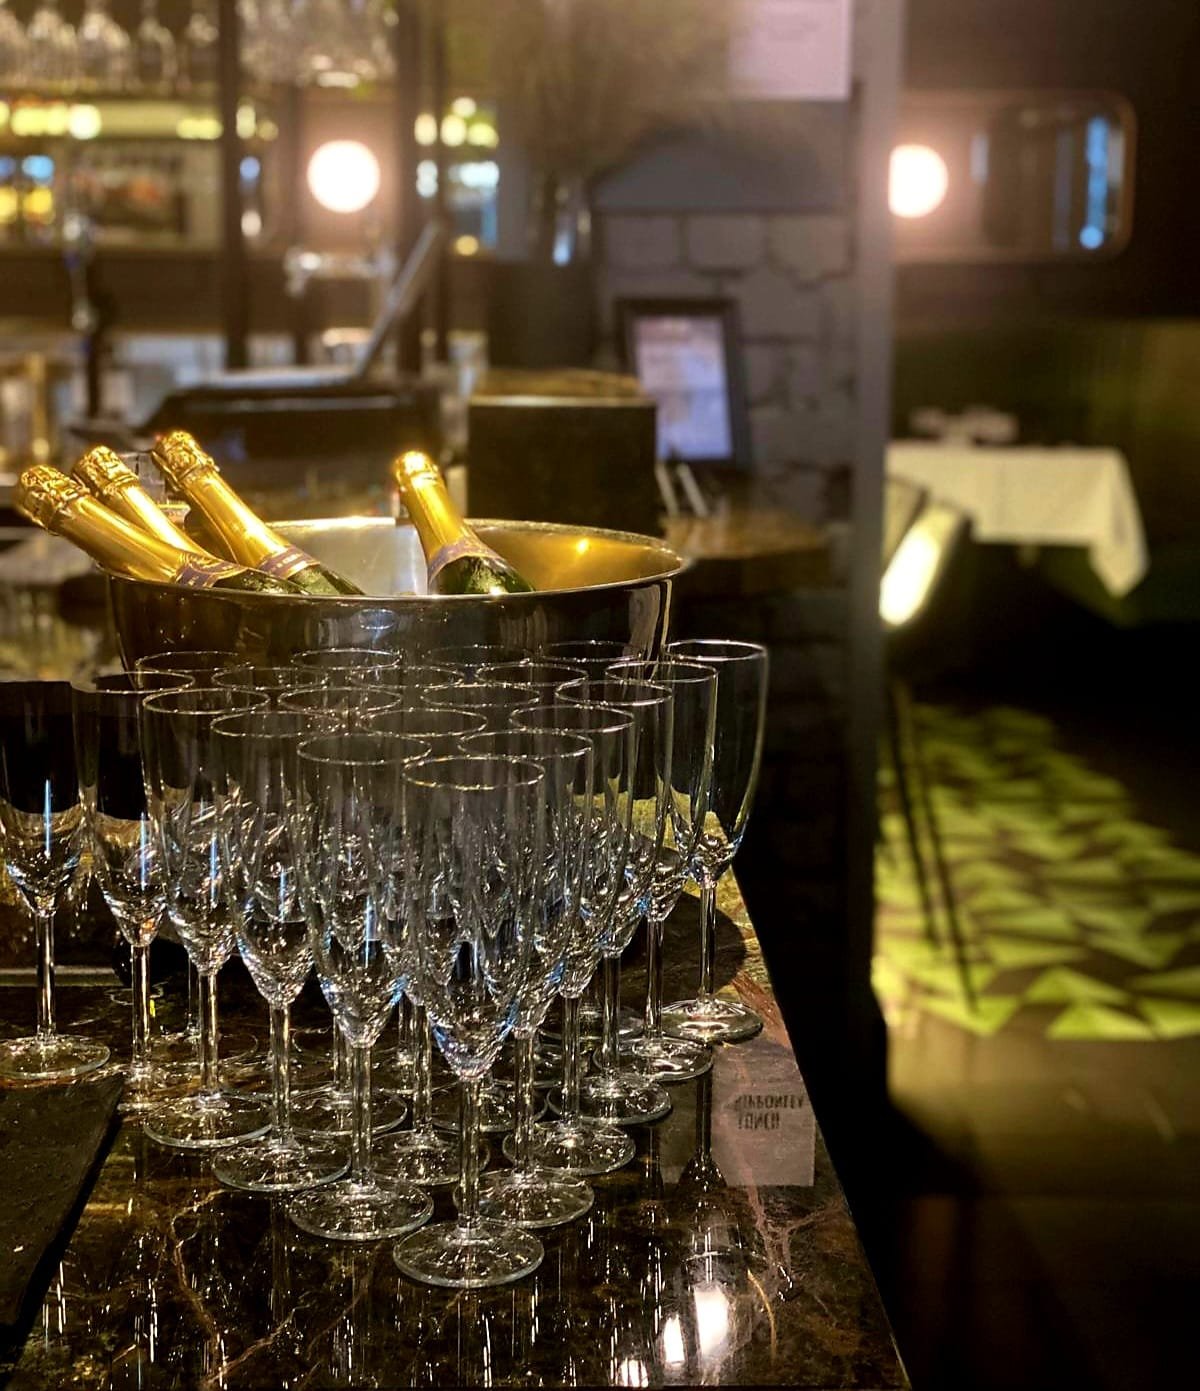 FREE FLOWING FRENCH BUBBLES

Enjoy 2 hours of free flowing French Bubbles every Friday &amp; Saturday at lunchtime for $35pp.
.
.
.
#champagne #bubbles #specialoffer #lunch #Melbourneeats #melbourne #rippfoodwine